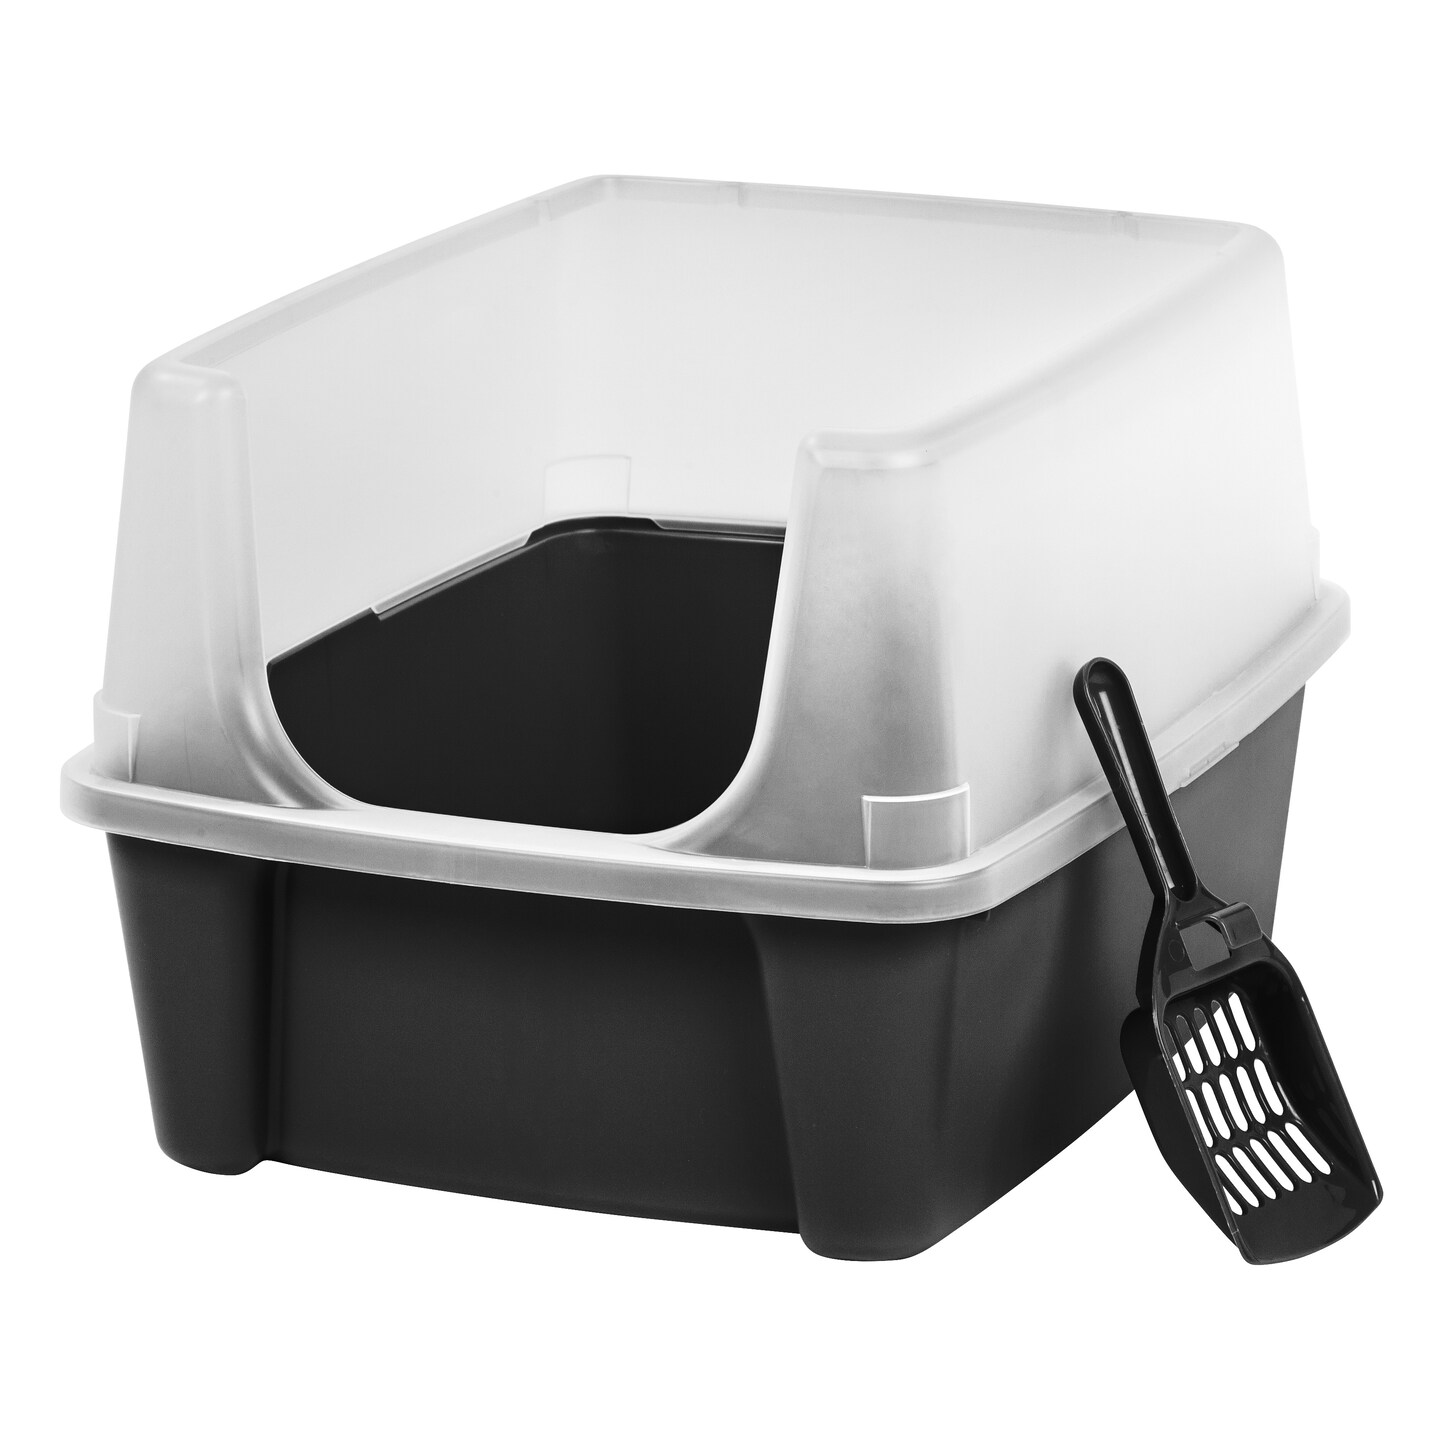 IRIS USA IRIS USA Open Top Cat Litter Tray with Scoop and Scatter Shield, Cat Litter Pan